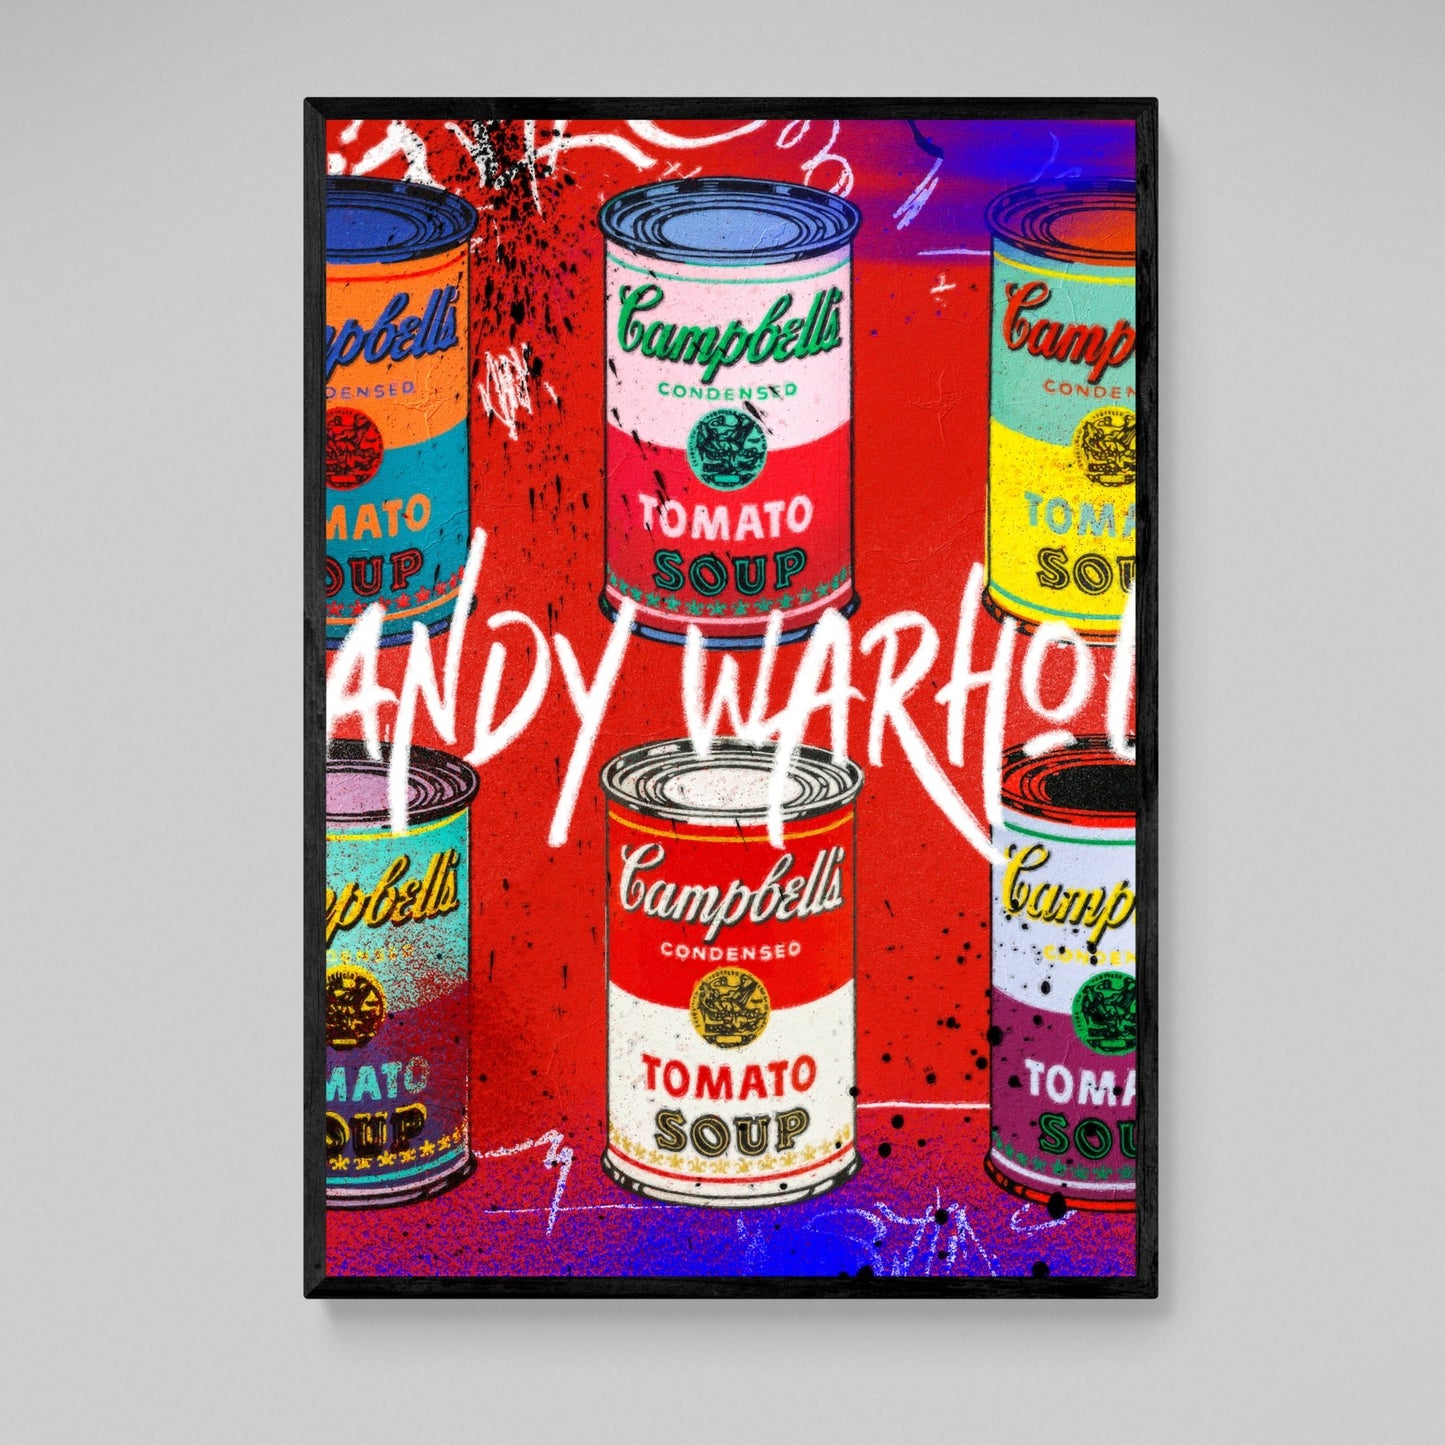 Andy Warhol Campbell Soup - Luxury Art Canvas